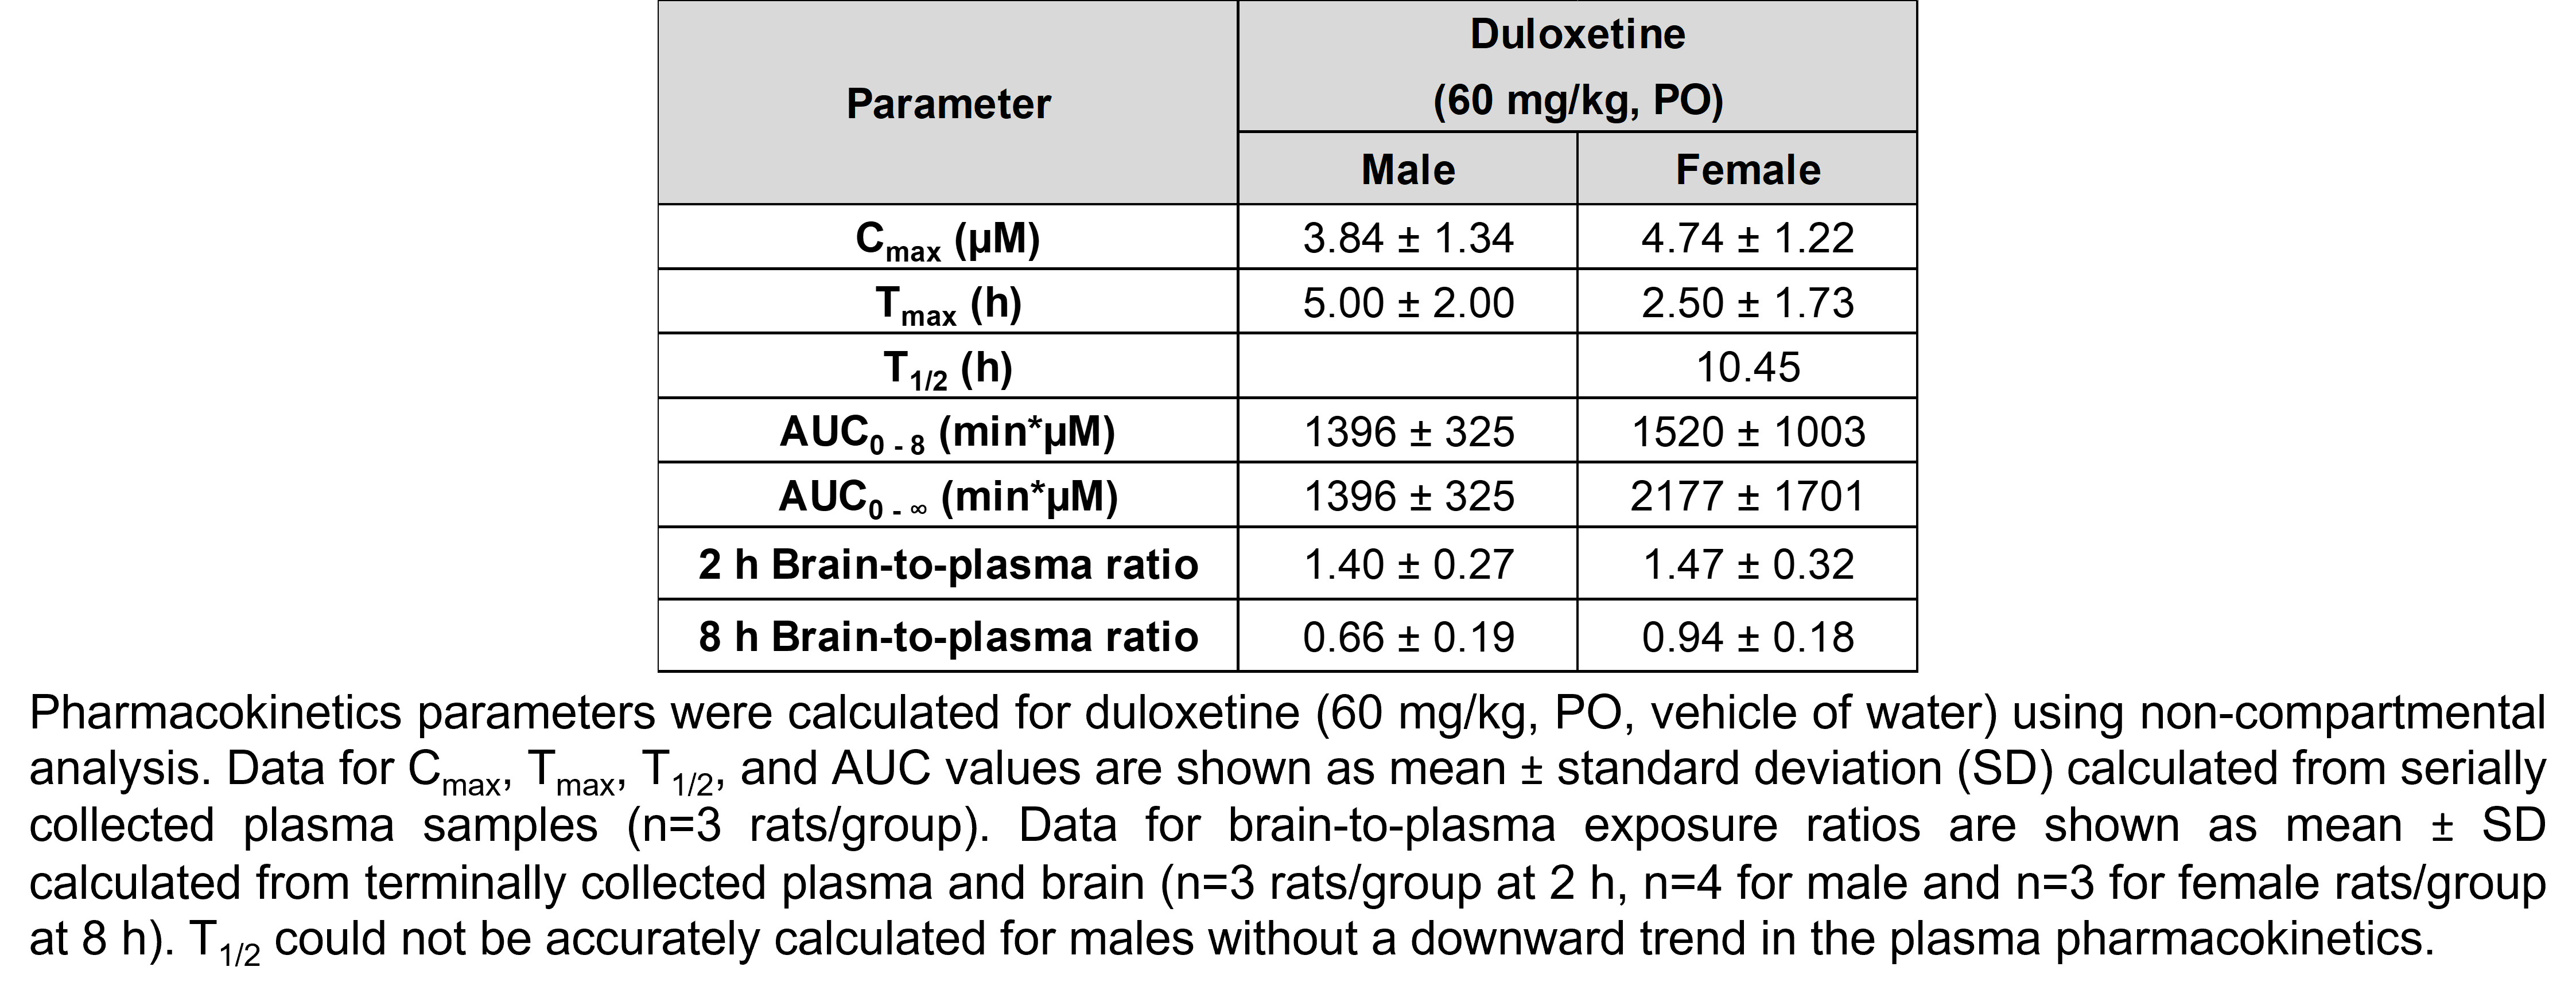 A table shows pharmacokinetics parameters calculated for duloxetine using non-compartmental analysis in male and female rats treated with duloxetine (60 mg/kg, PO, vehicle of water). The means for the 2 groups (males and females treated with 60 mg/kg duloxetine, respectively) are as follows. The highest concentration (Cmax) was 3.84 and 4.74 µM; the time at the maximum concentration (Tmax) was 5 and 2.5 hours; the half-life (T1/2) was not calculated for males and 10.45 hours for females; area under the curve for time 0 to 8 hours was 1396 and 1520 minutes*µM; area under the curve for time 0 to infinity was 1396 and 2177 minutes*µM; the brain-to-plasma ratio at 2 hours was 1.4 and 1.47; the brain-to-plasma ratio at 8 hours was 0.66 and 0.94